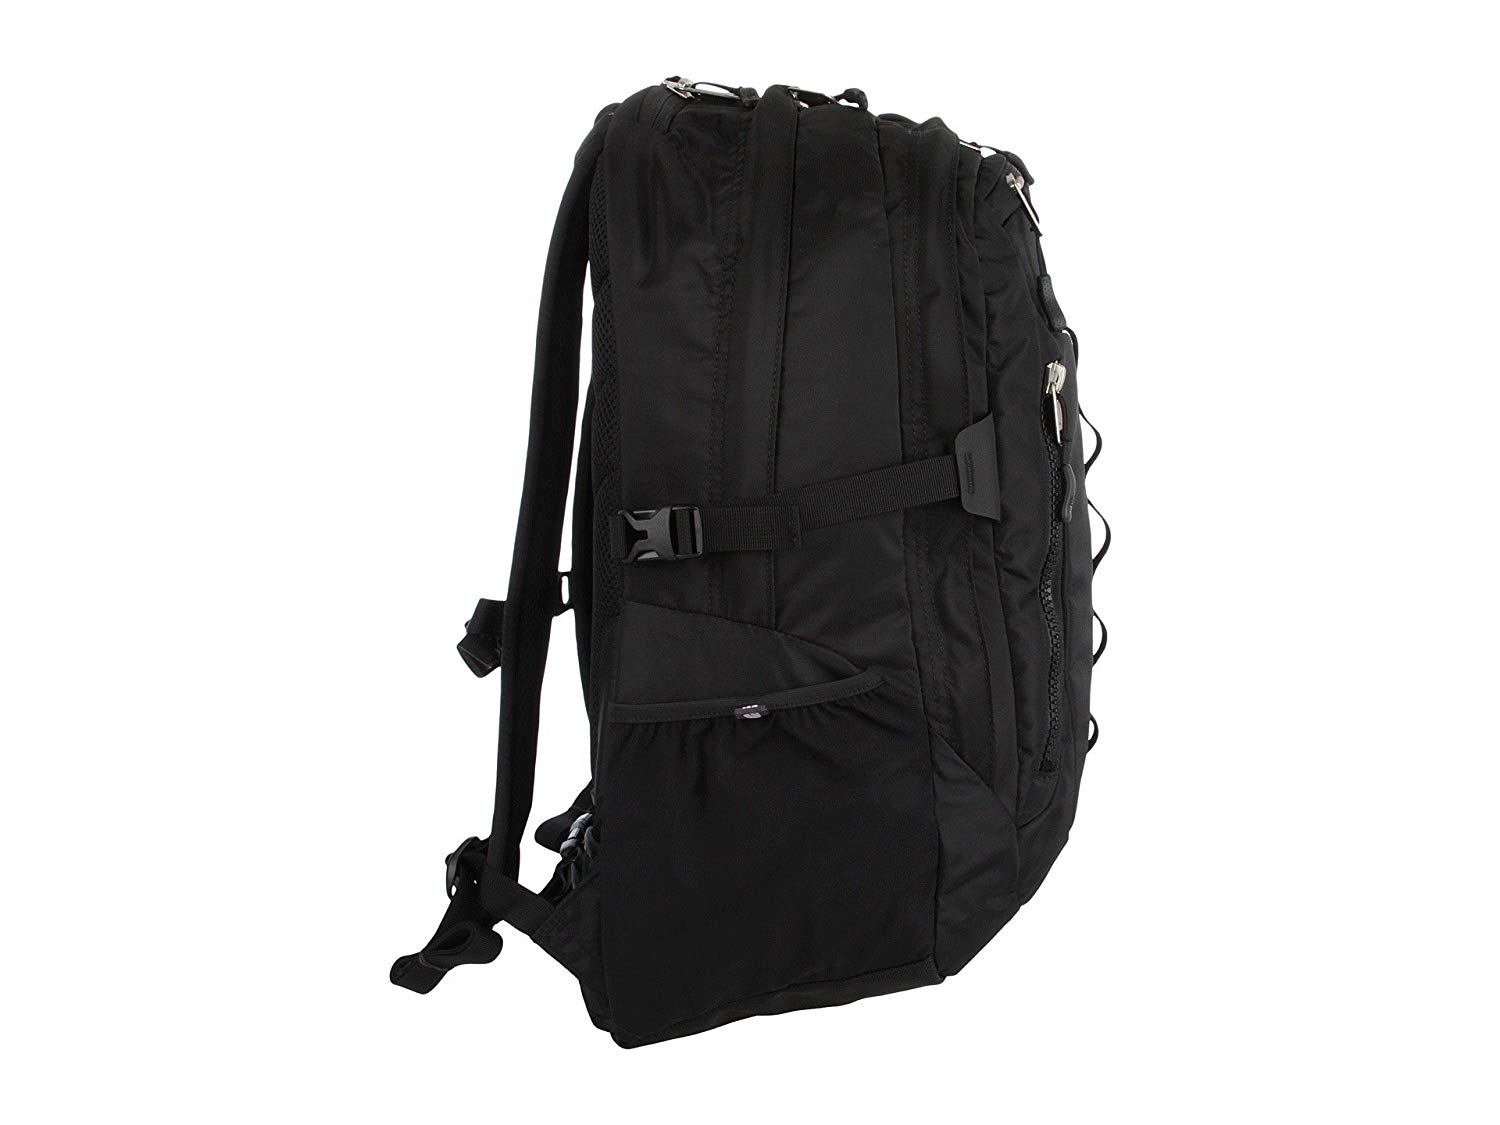 The North Face Surge II Backpack The North Face ktmart.vn 4